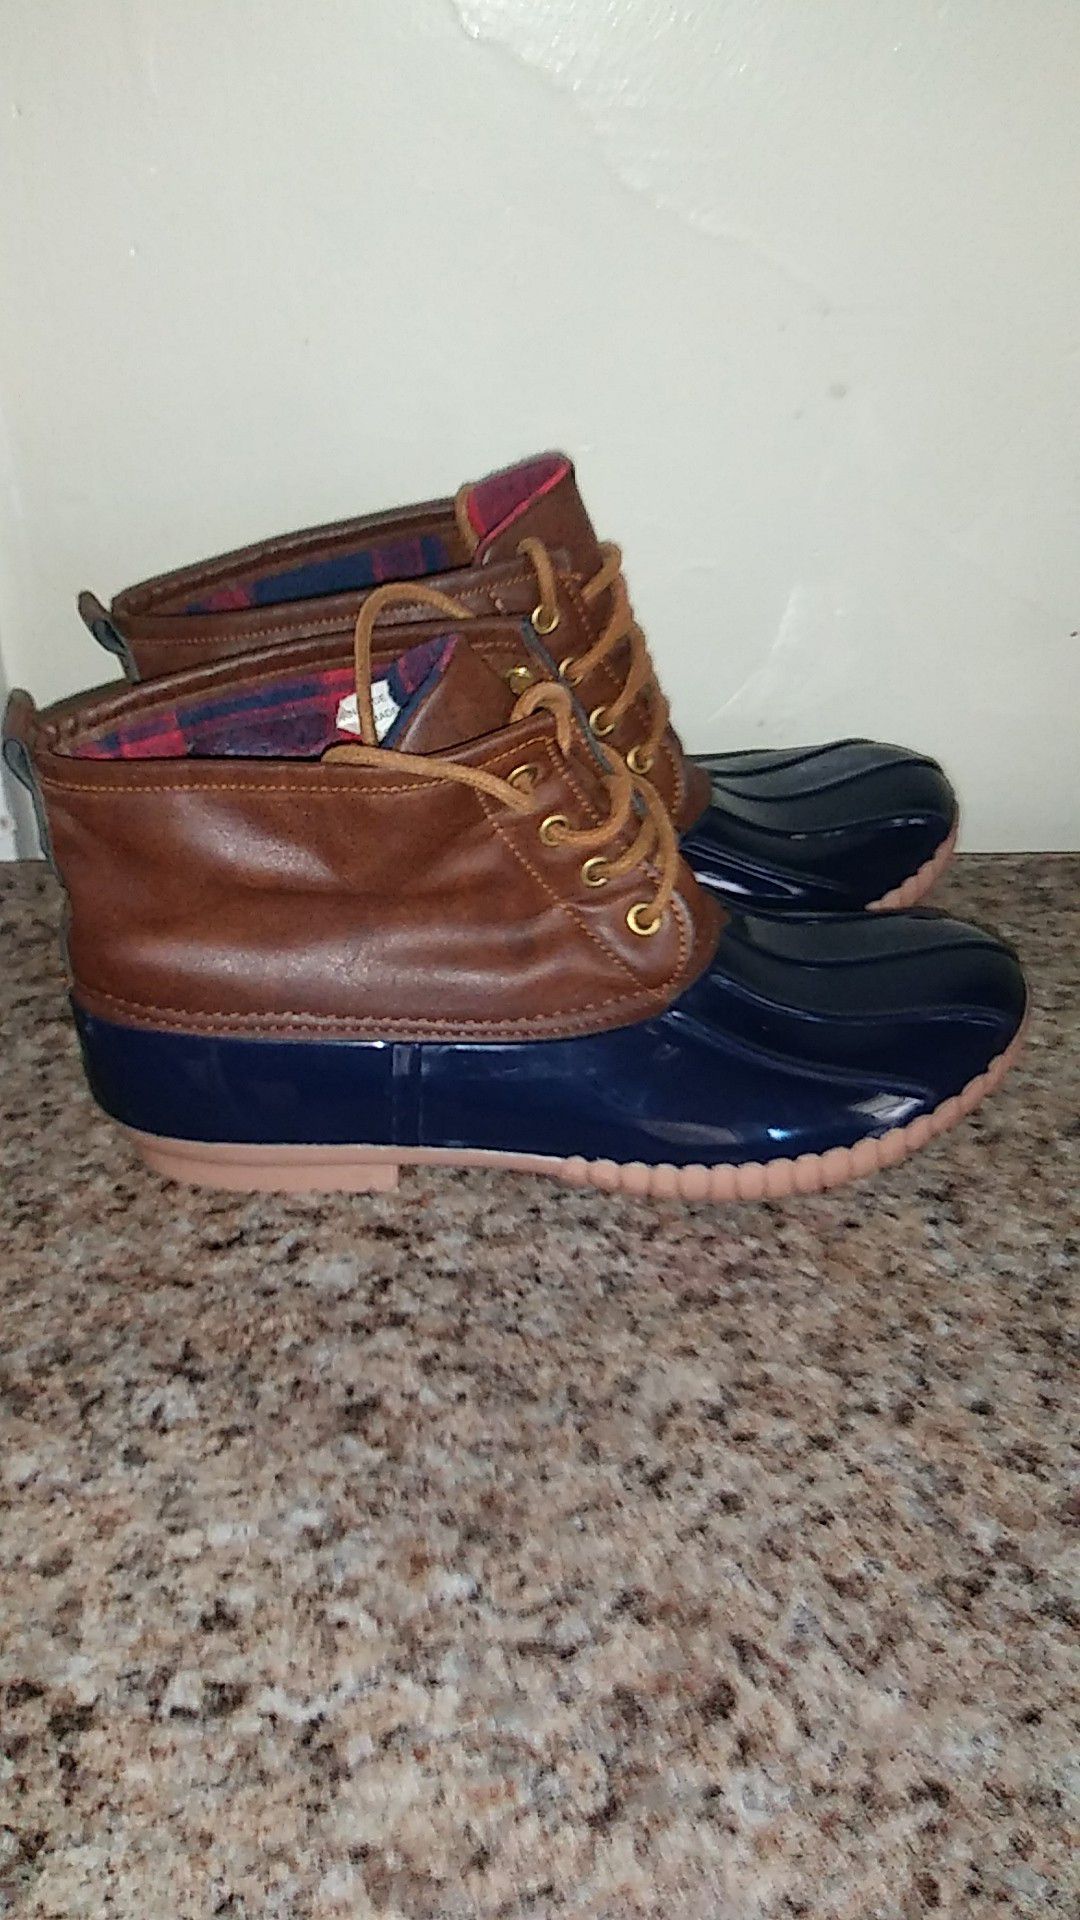 Women's dark blue and brown rain boots woman size 8